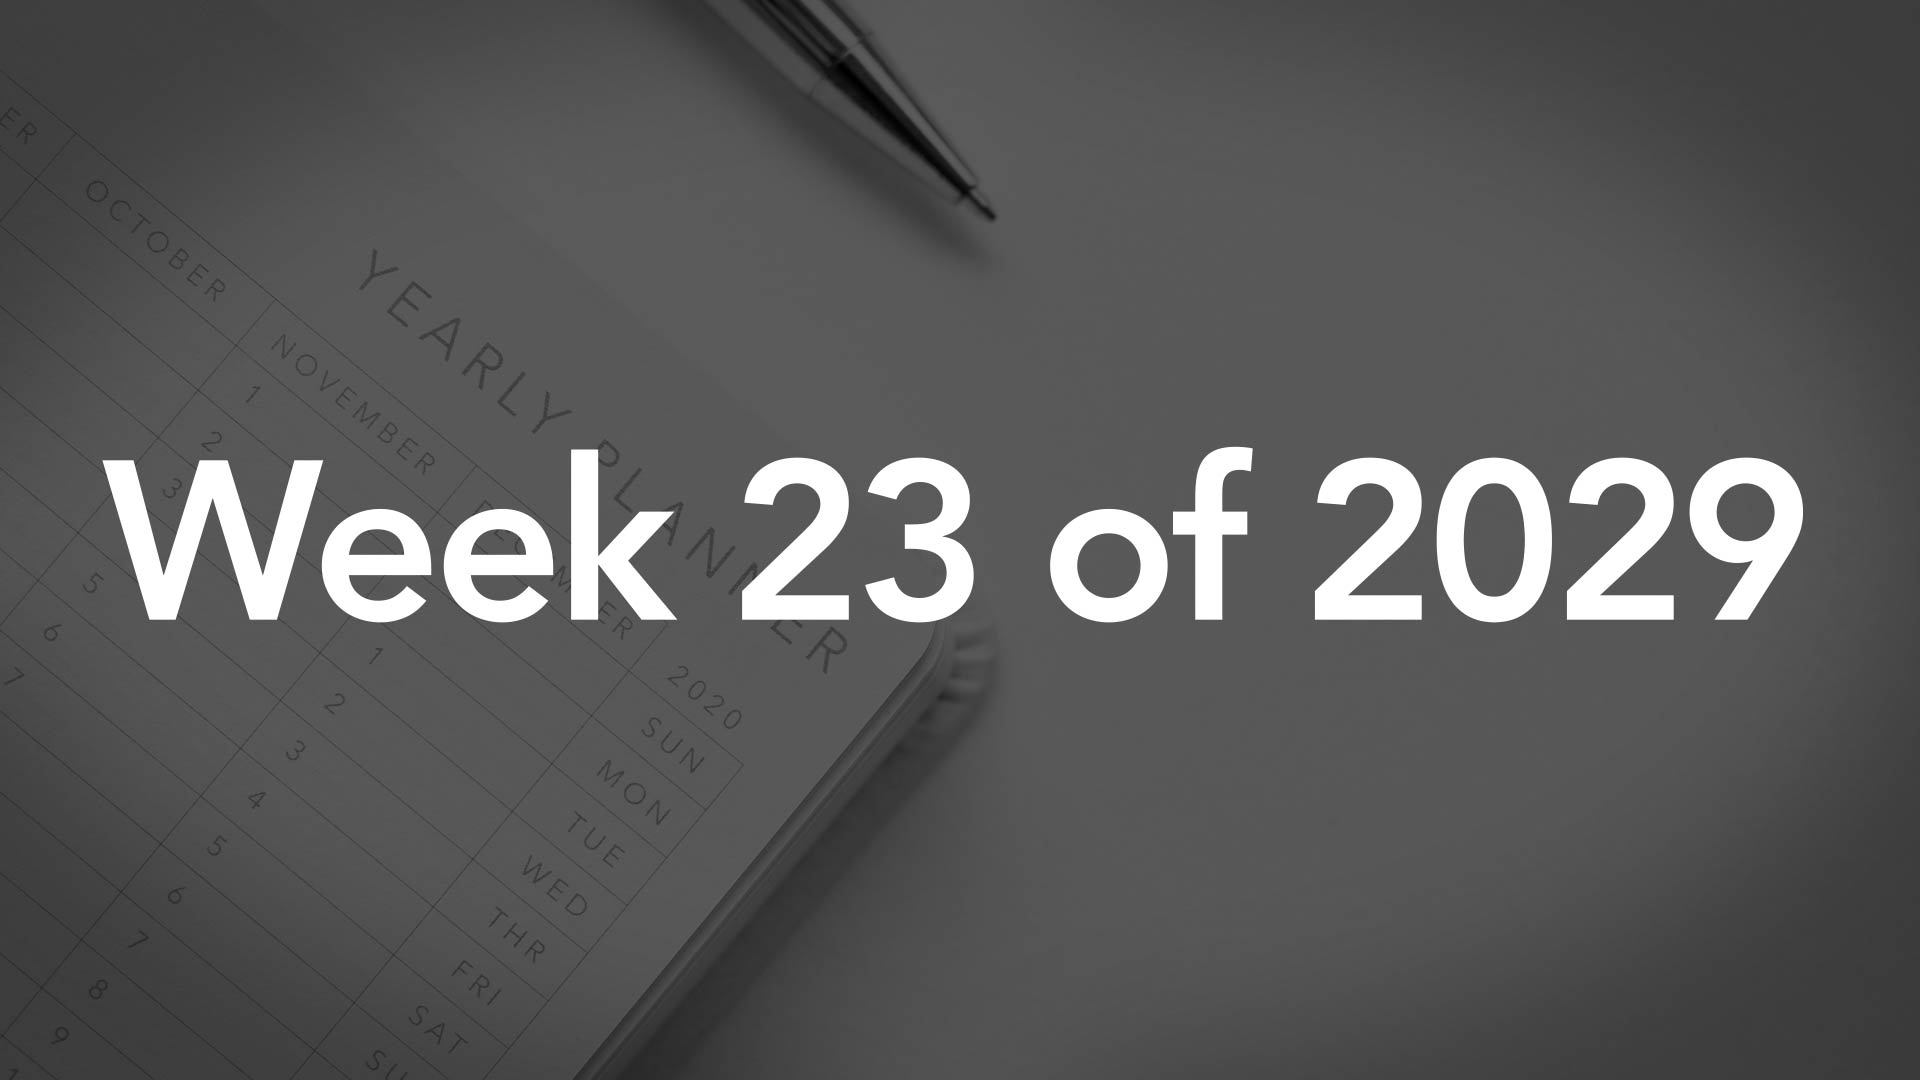 Title Image for Week 23 of 2029